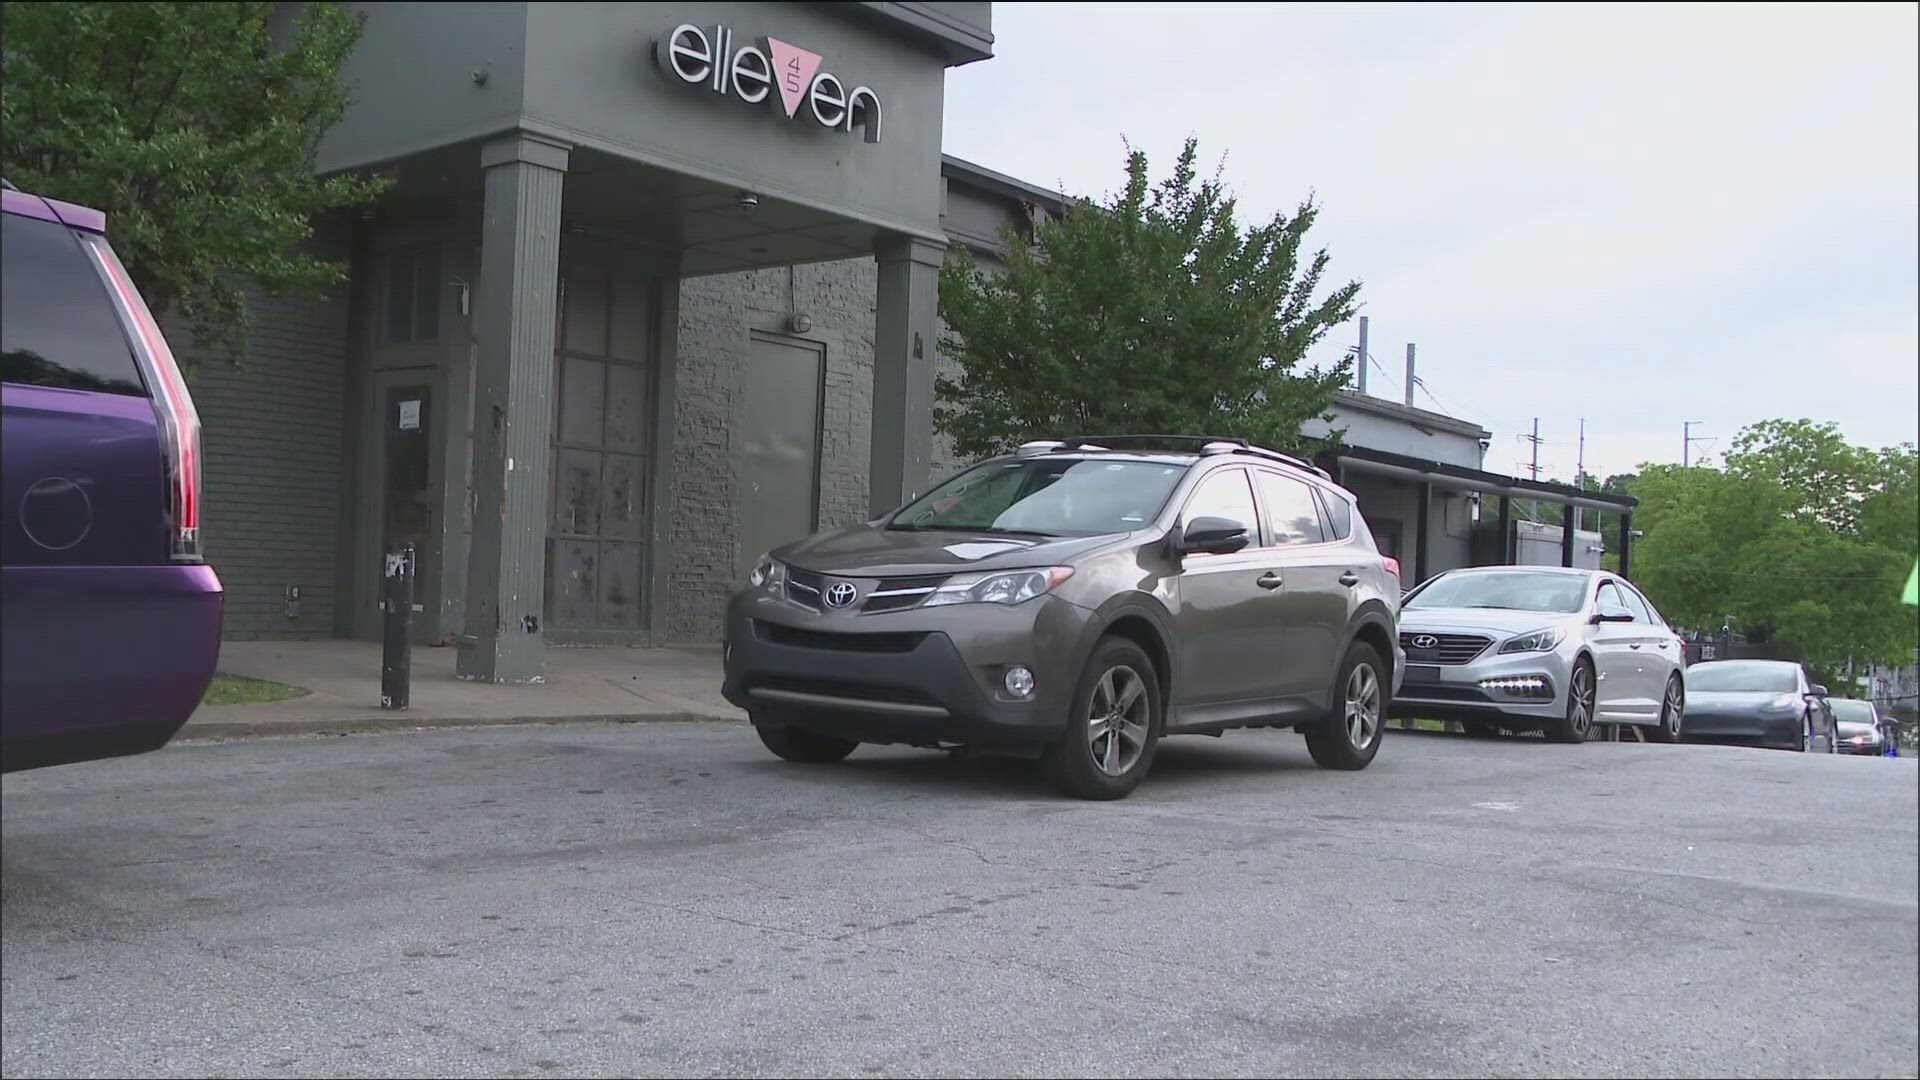 A fourth lawsuit has been filed against Elleven45 Lounge followed the Mother's Day shooting that killed two and left four injured.